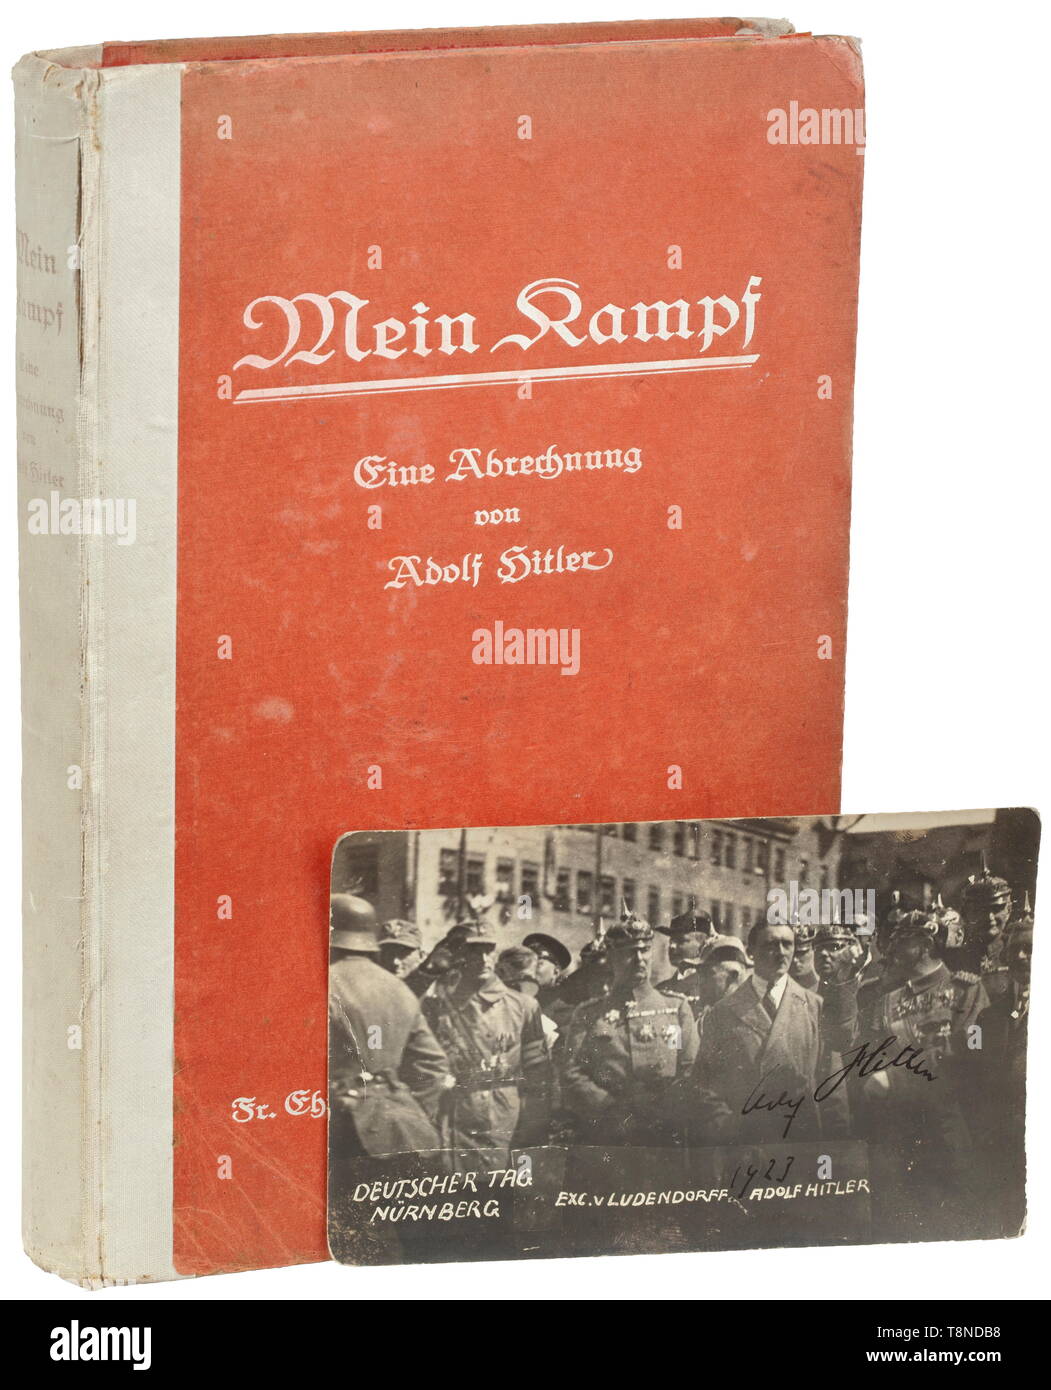 Adolf Hitler - a first edition of 'Mein Kampf' (volume 1) with handwritten ink dedication of 1925 to Ernst Wieser On the flyleaf a dedication (tr.) 'Dedicated to Mr. Ernst Wieser in remembrance of the time spent in Landsberg a/L. fortress with best regards - Adolf Hitler - Munich 17/Sept. 1925'. On the title page ink signature 'Ernst Wieser 17.9.1925'. Cover knocked, stained. With photo postcard (tr.) 'German Day Nuremberg - Exc. v Ludendorff - Adolf Hitler' with handwritten ink signature 'Adolf Hitler 1923' , with another signature at back '7.9.23 Ernst Wieser'. Also two g, Editorial-Use-Only Stock Photo